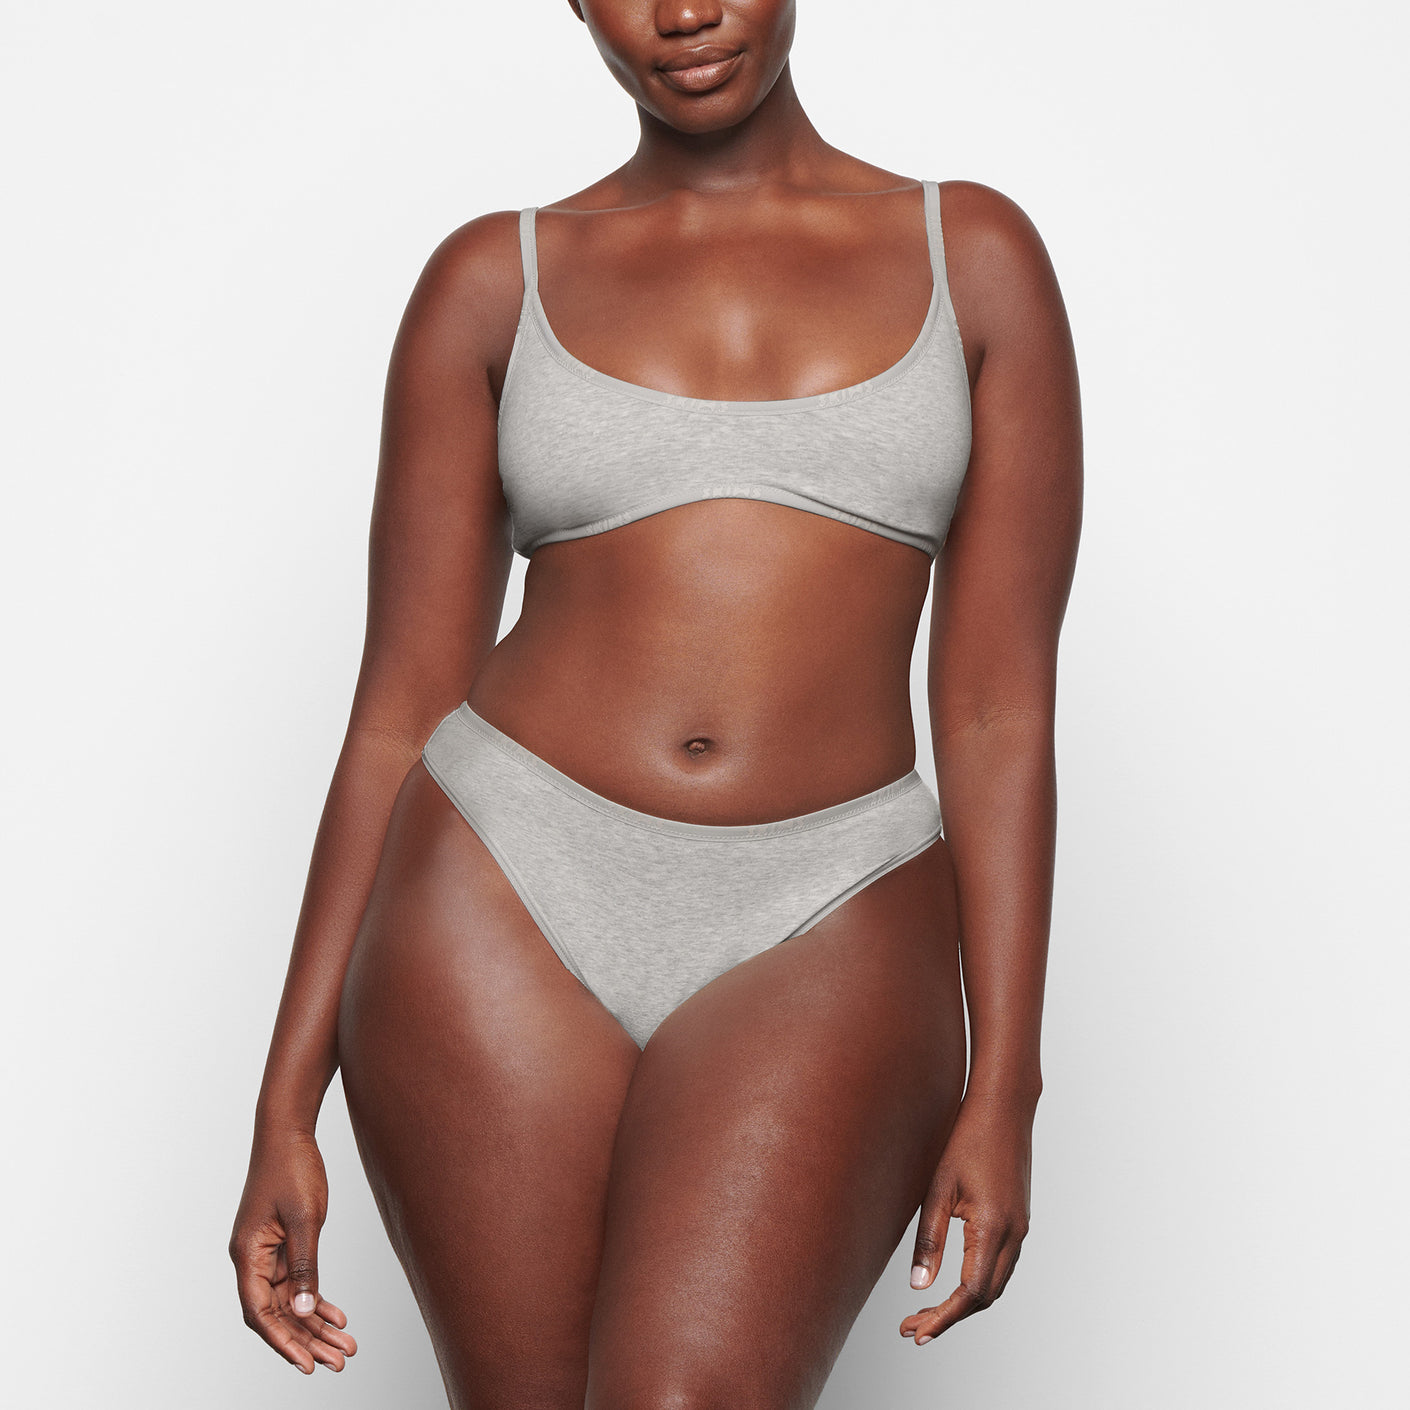 SKIMS Cotton Plunge Bralette in Iris Mica XS - $75 New With Tags - From  Matilda